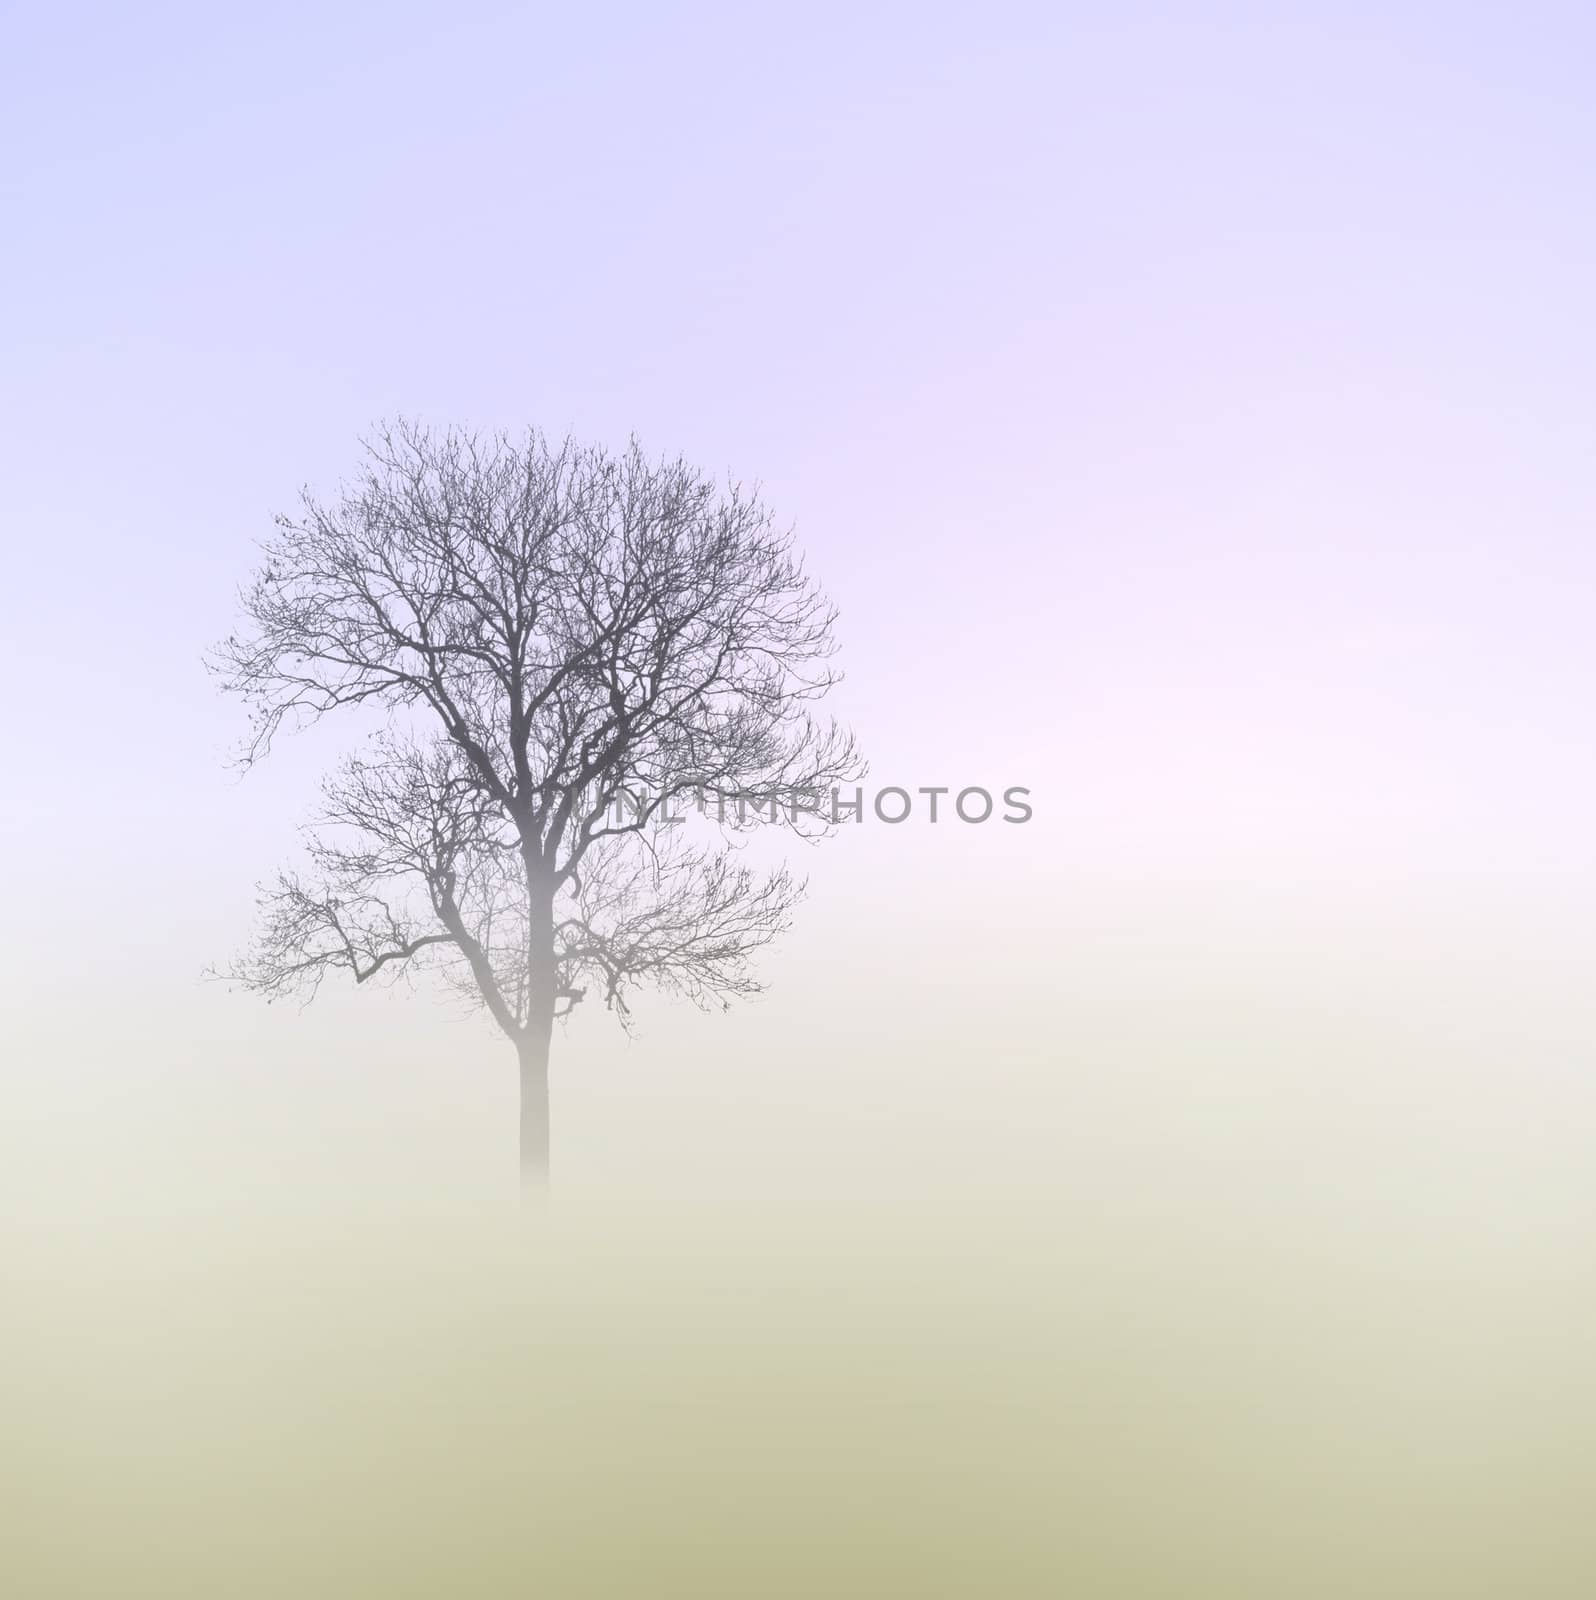 A Misty Morning with Tree